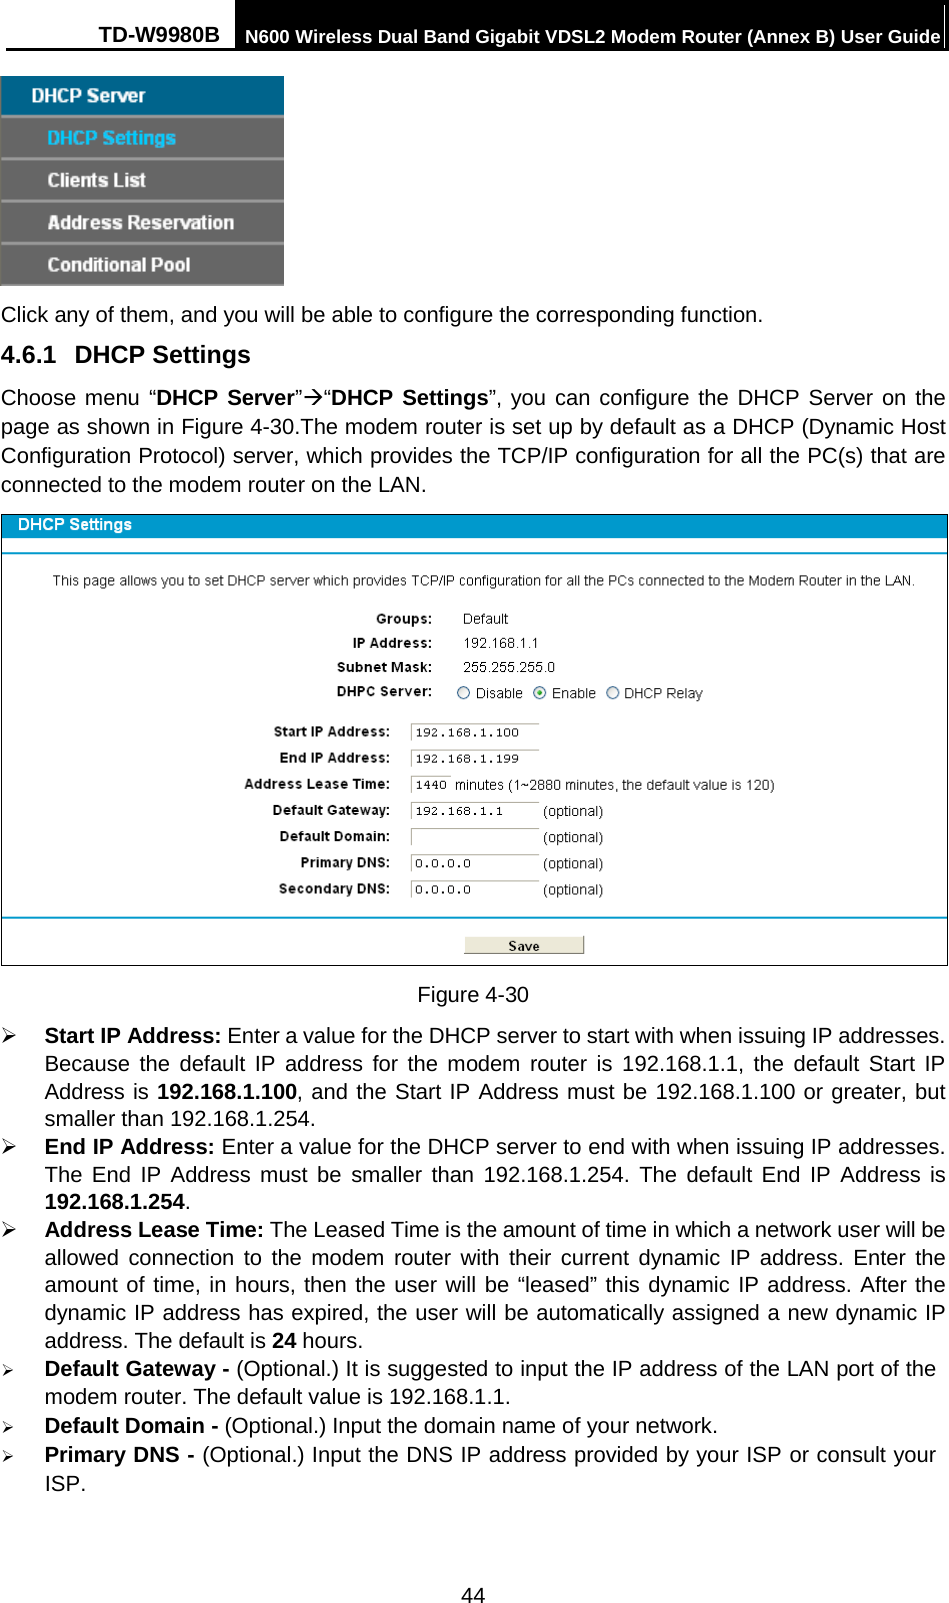 TD-W9980B N600 Wireless Dual Band Gigabit VDSL2 Modem Router (Annex B) User Guide   Click any of them, and you will be able to configure the corresponding function. 4.6.1 DHCP Settings Choose menu “DHCP Server”“DHCP Settings”, you can configure the DHCP Server on the page as shown in Figure 4-30.The modem router is set up by default as a DHCP (Dynamic Host Configuration Protocol) server, which provides the TCP/IP configuration for all the PC(s) that are connected to the modem router on the LAN.  Figure 4-30  Start IP Address: Enter a value for the DHCP server to start with when issuing IP addresses. Because the default IP address for the modem router is 192.168.1.1, the default Start IP Address is 192.168.1.100, and the Start IP Address must be 192.168.1.100 or greater, but smaller than 192.168.1.254.  End IP Address: Enter a value for the DHCP server to end with when issuing IP addresses. The End IP Address must be smaller than 192.168.1.254. The default End IP Address is 192.168.1.254.  Address Lease Time: The Leased Time is the amount of time in which a network user will be allowed connection to the modem router with their current dynamic IP address. Enter the amount of time, in hours, then the user will be “leased” this dynamic IP address. After the dynamic IP address has expired, the user will be automatically assigned a new dynamic IP address. The default is 24 hours.  Default Gateway - (Optional.) It is suggested to input the IP address of the LAN port of the modem router. The default value is 192.168.1.1.  Default Domain - (Optional.) Input the domain name of your network.  Primary DNS - (Optional.) Input the DNS IP address provided by your ISP or consult your ISP. 44 